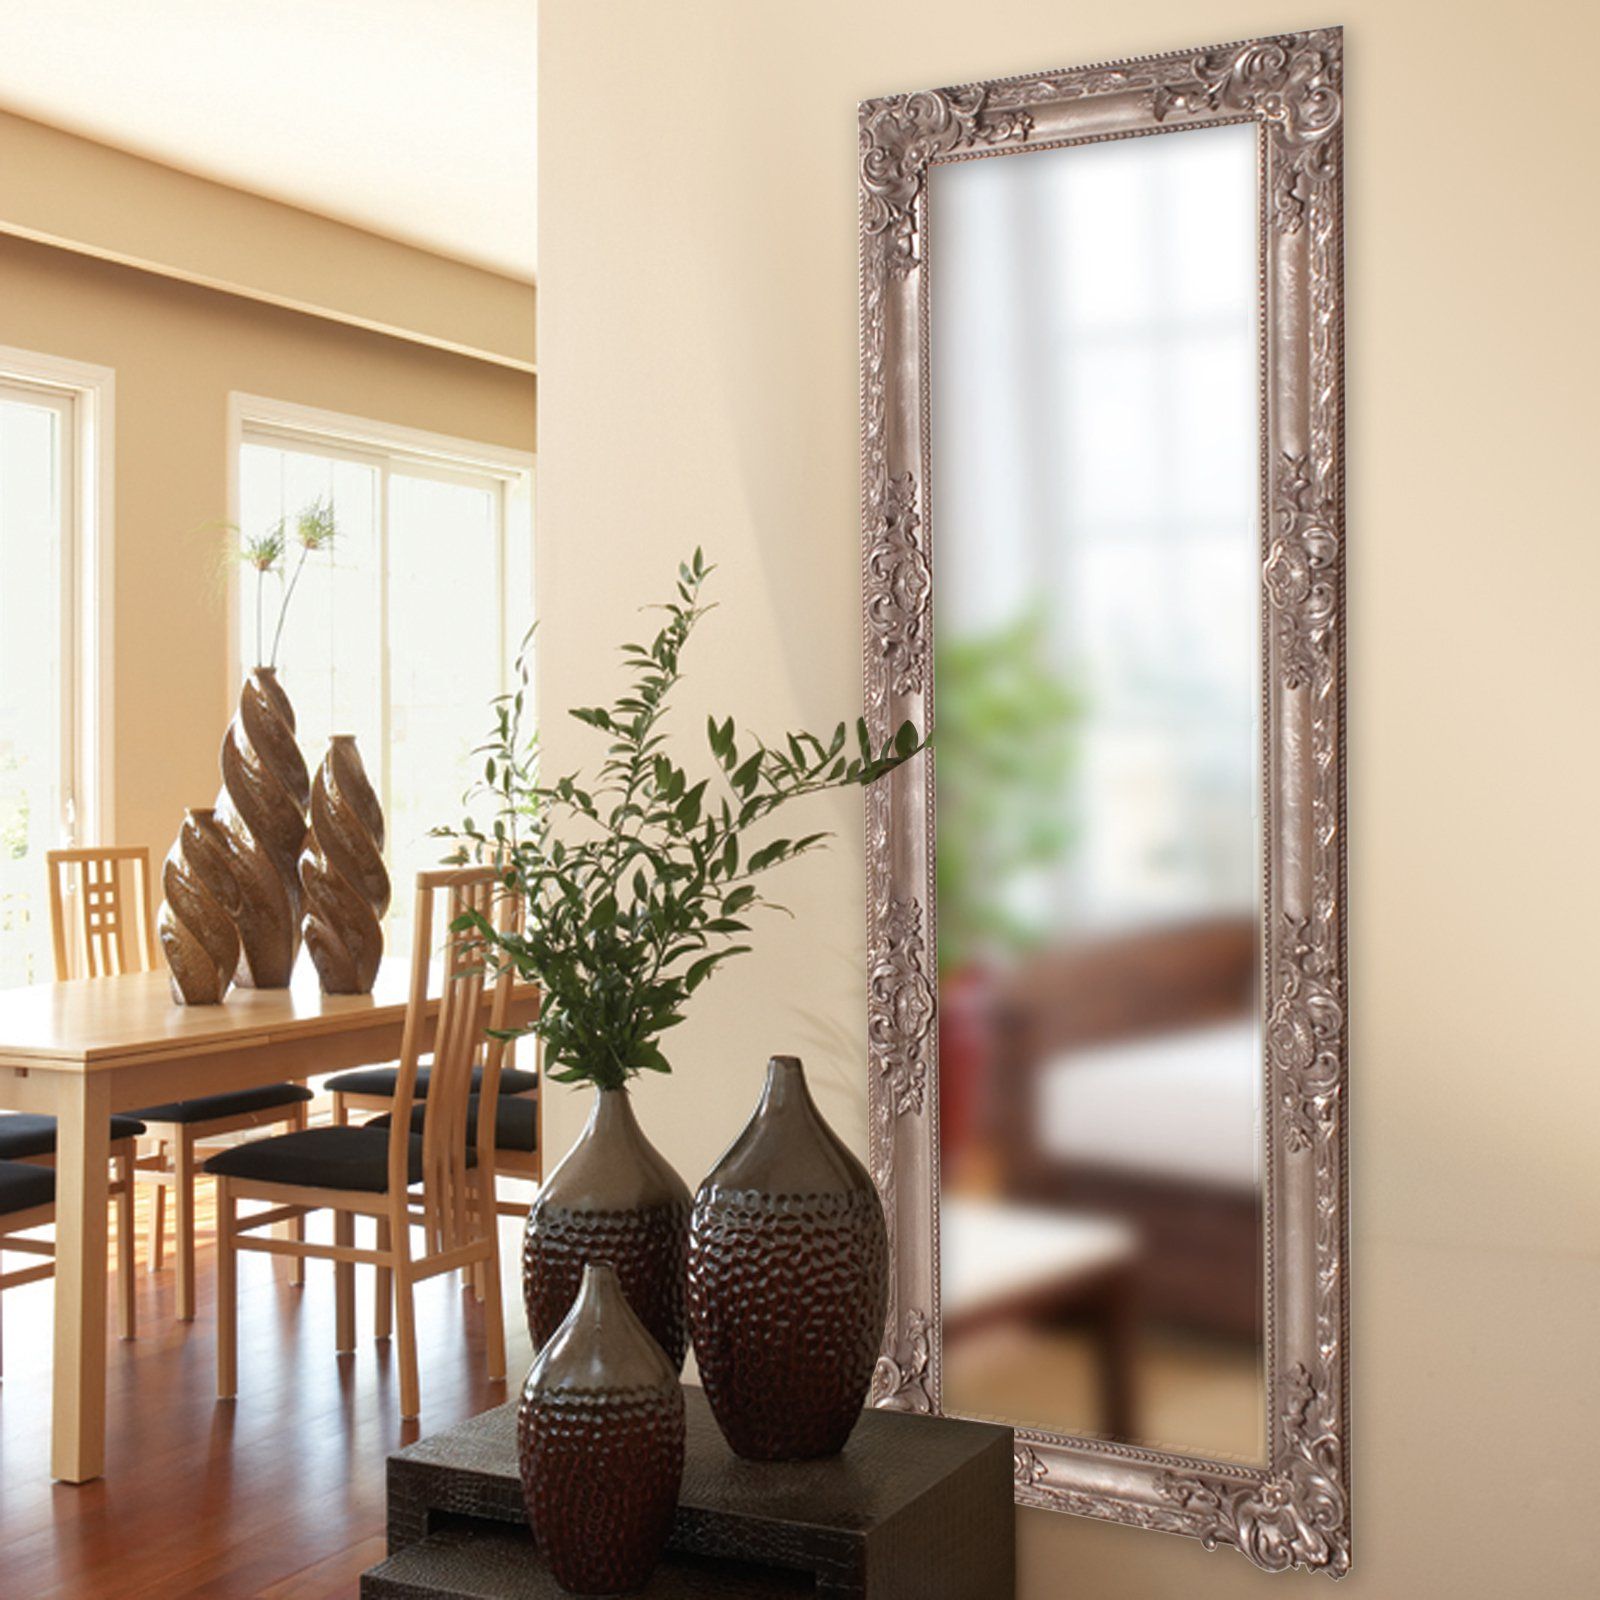 Living Room Wall Mirrors Throughout Most Recent Belham Living Carlos Full Length Wall Mirror – 23w X 62h In (View 7 of 20)